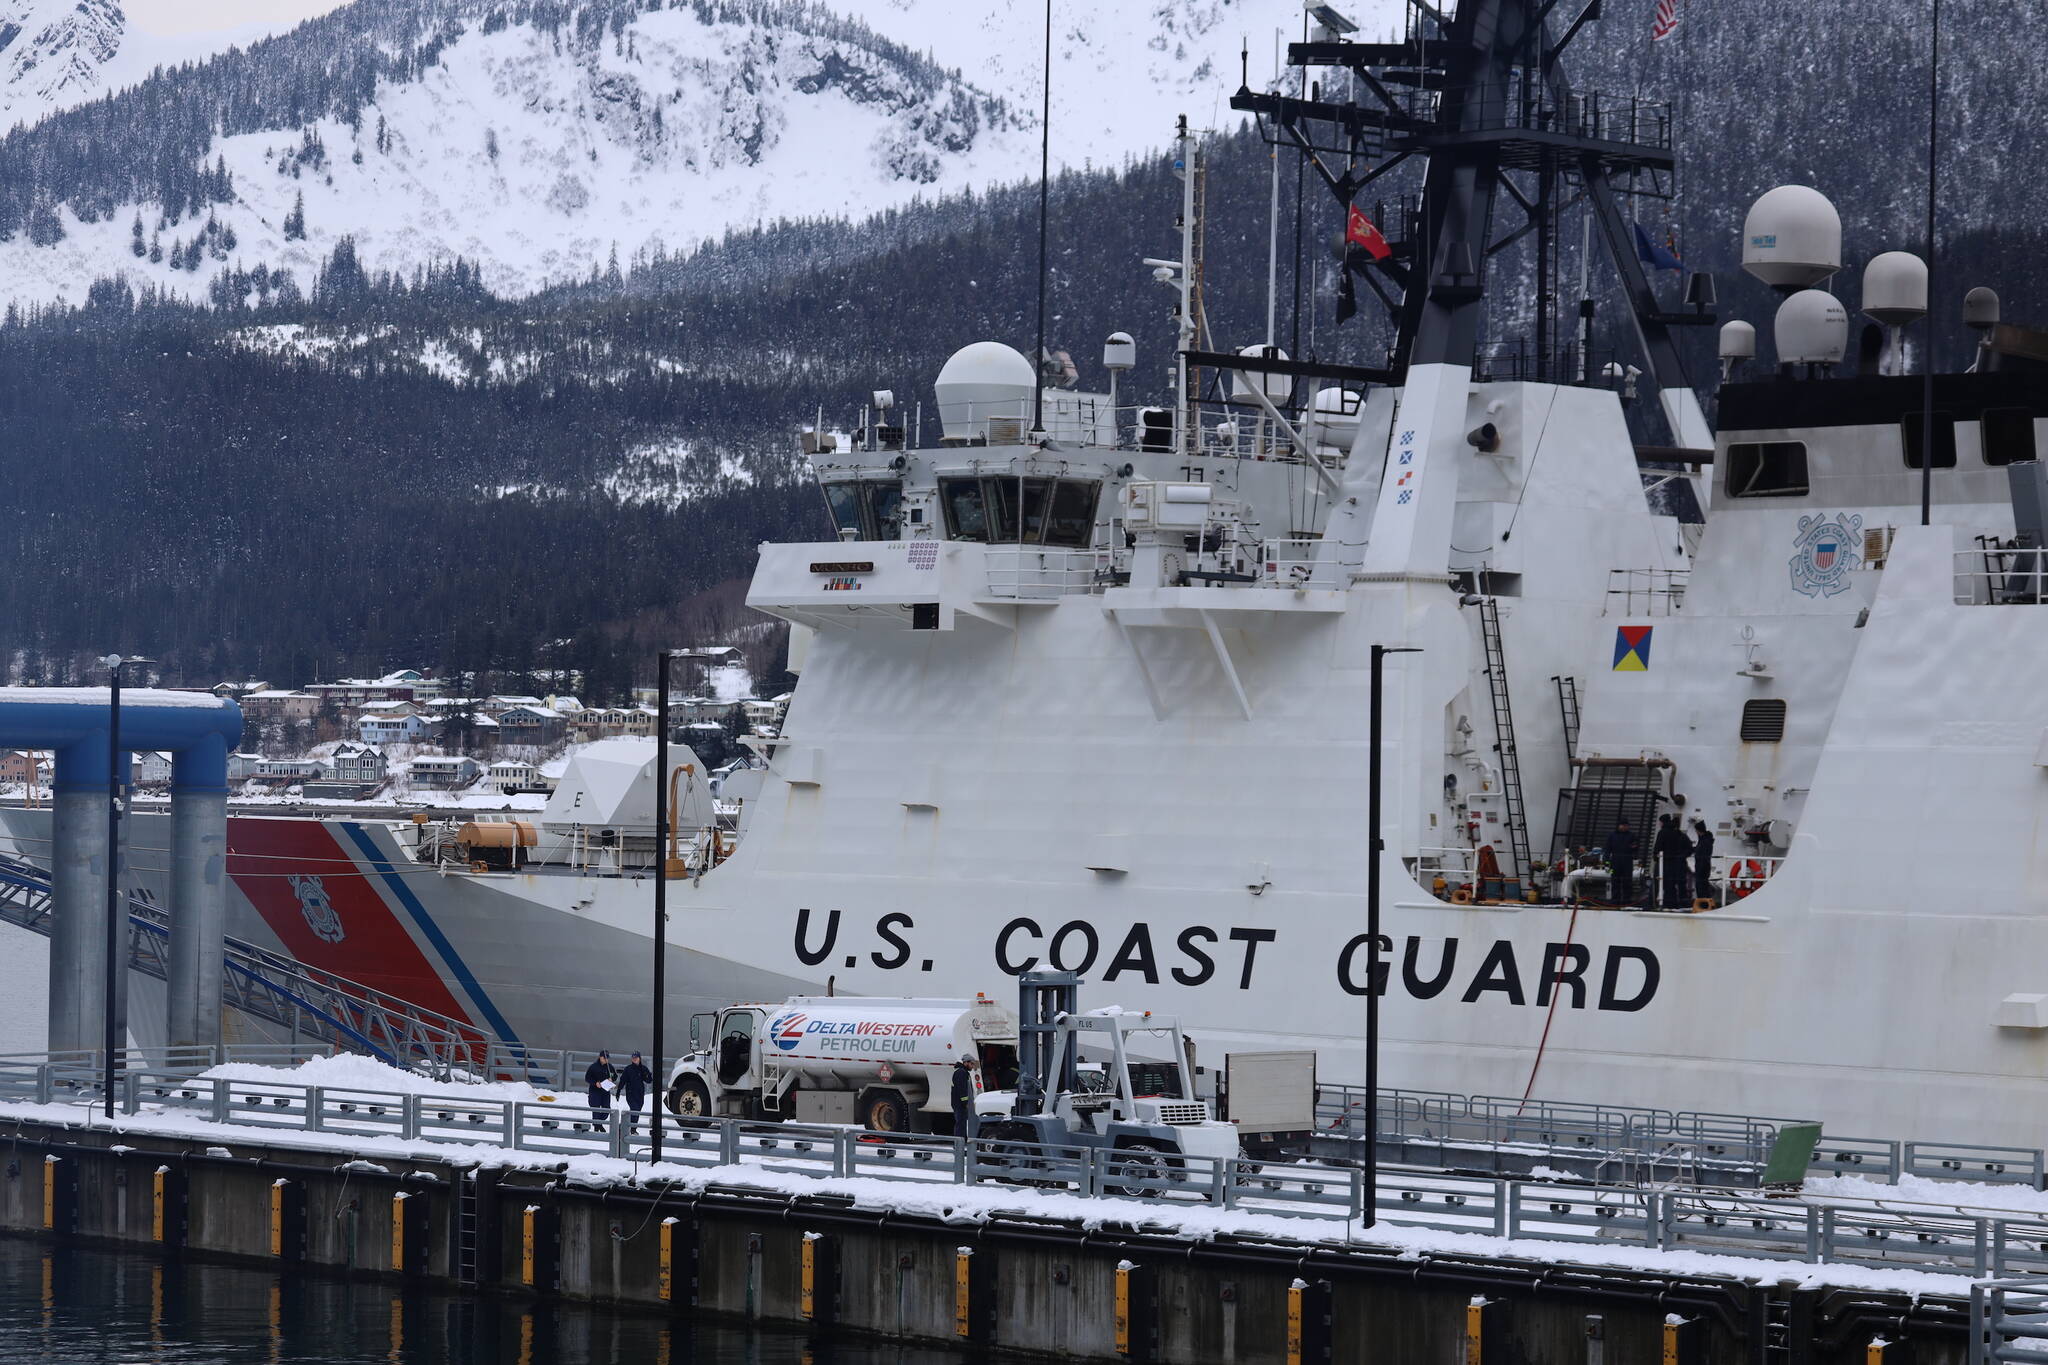 Clarise Larson / Juneau Empire 
Coast Guard Cutter Munro docks in Juneau for a scheduled port visit Monday. The port visit marks Munro’s final stop before returning to its homeport in Alameda, California after 11,500 miles and 105 days away from homeport.